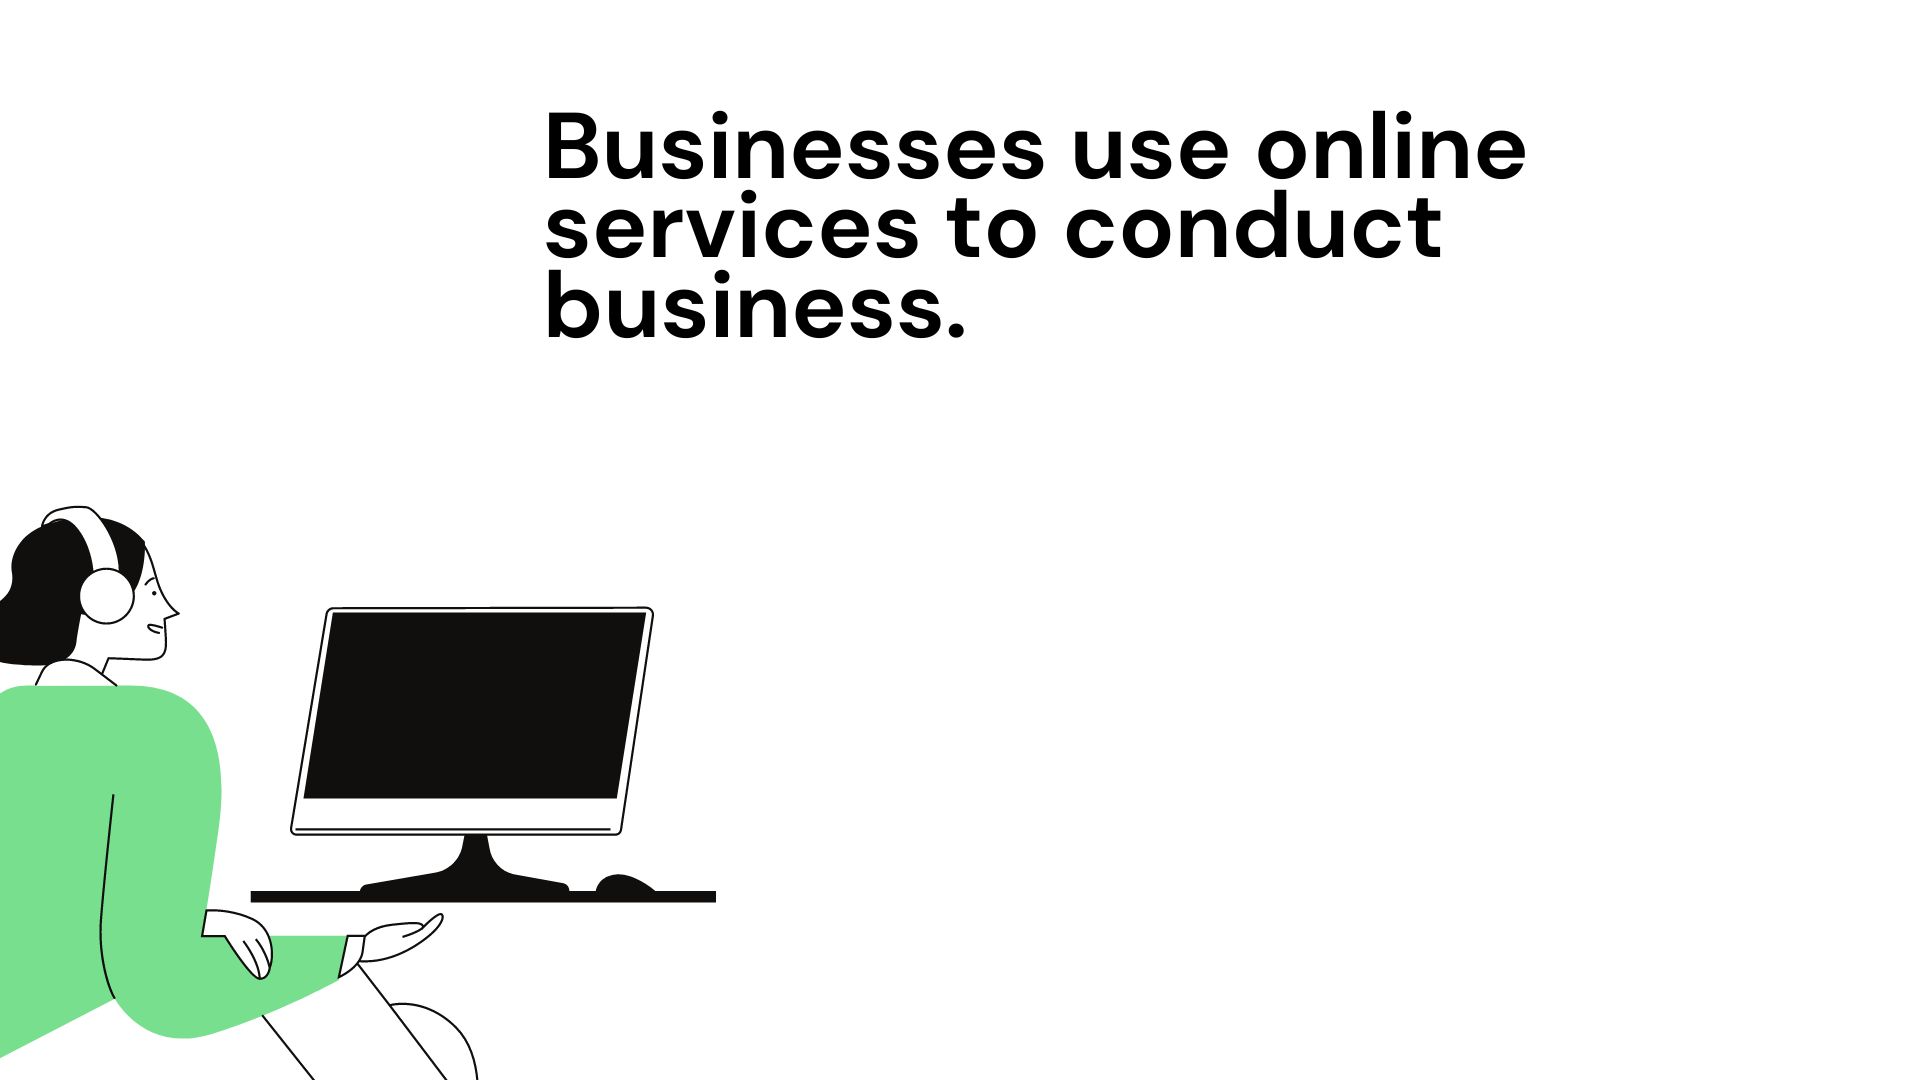 Businesses use online services to conduct business.